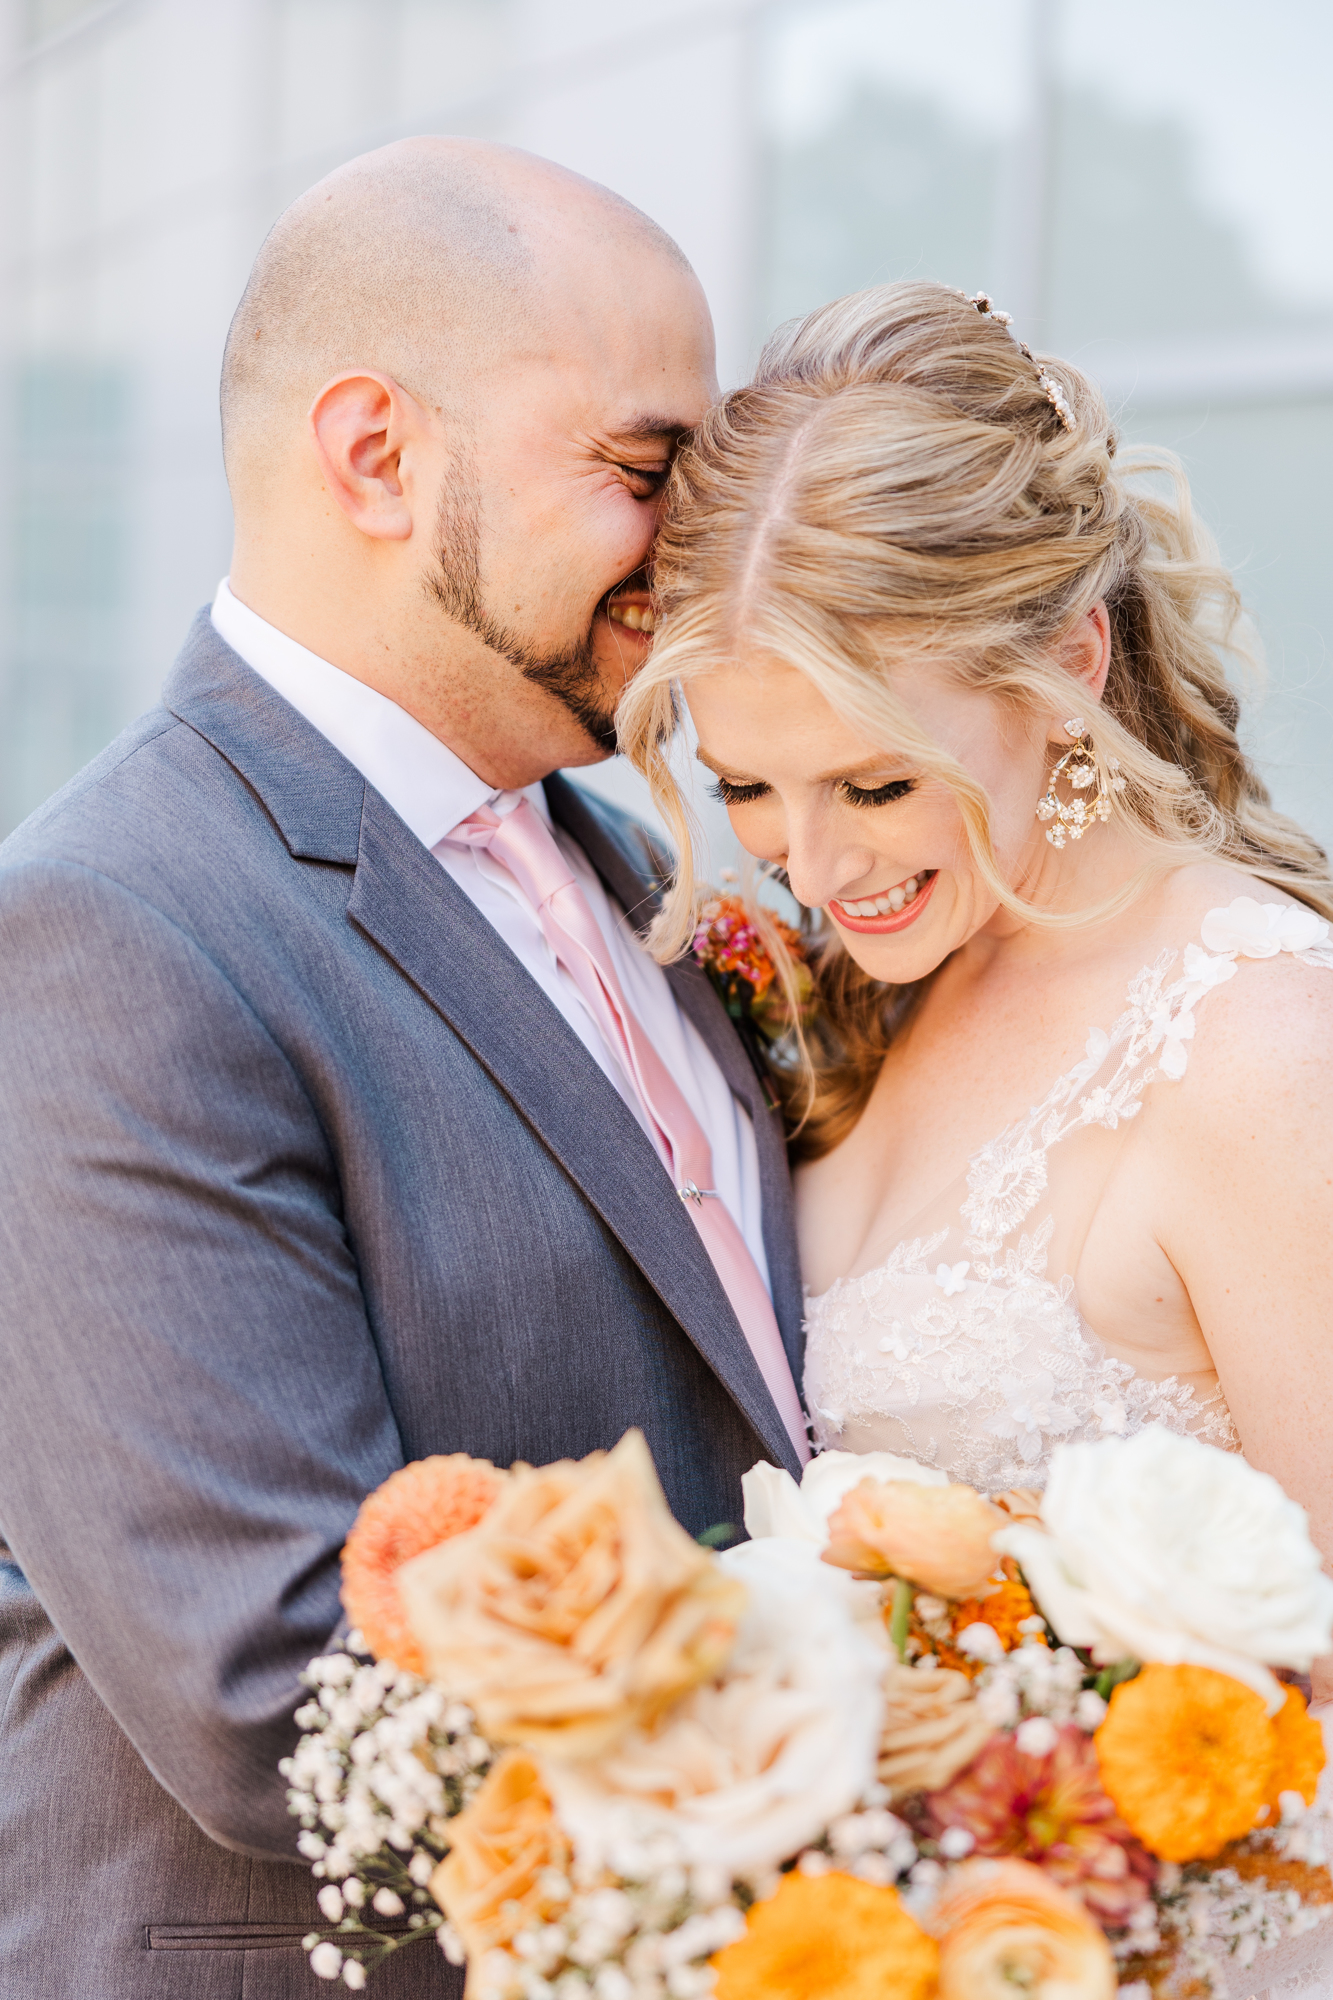 Personal New Jersey Wedding at W Hoboken